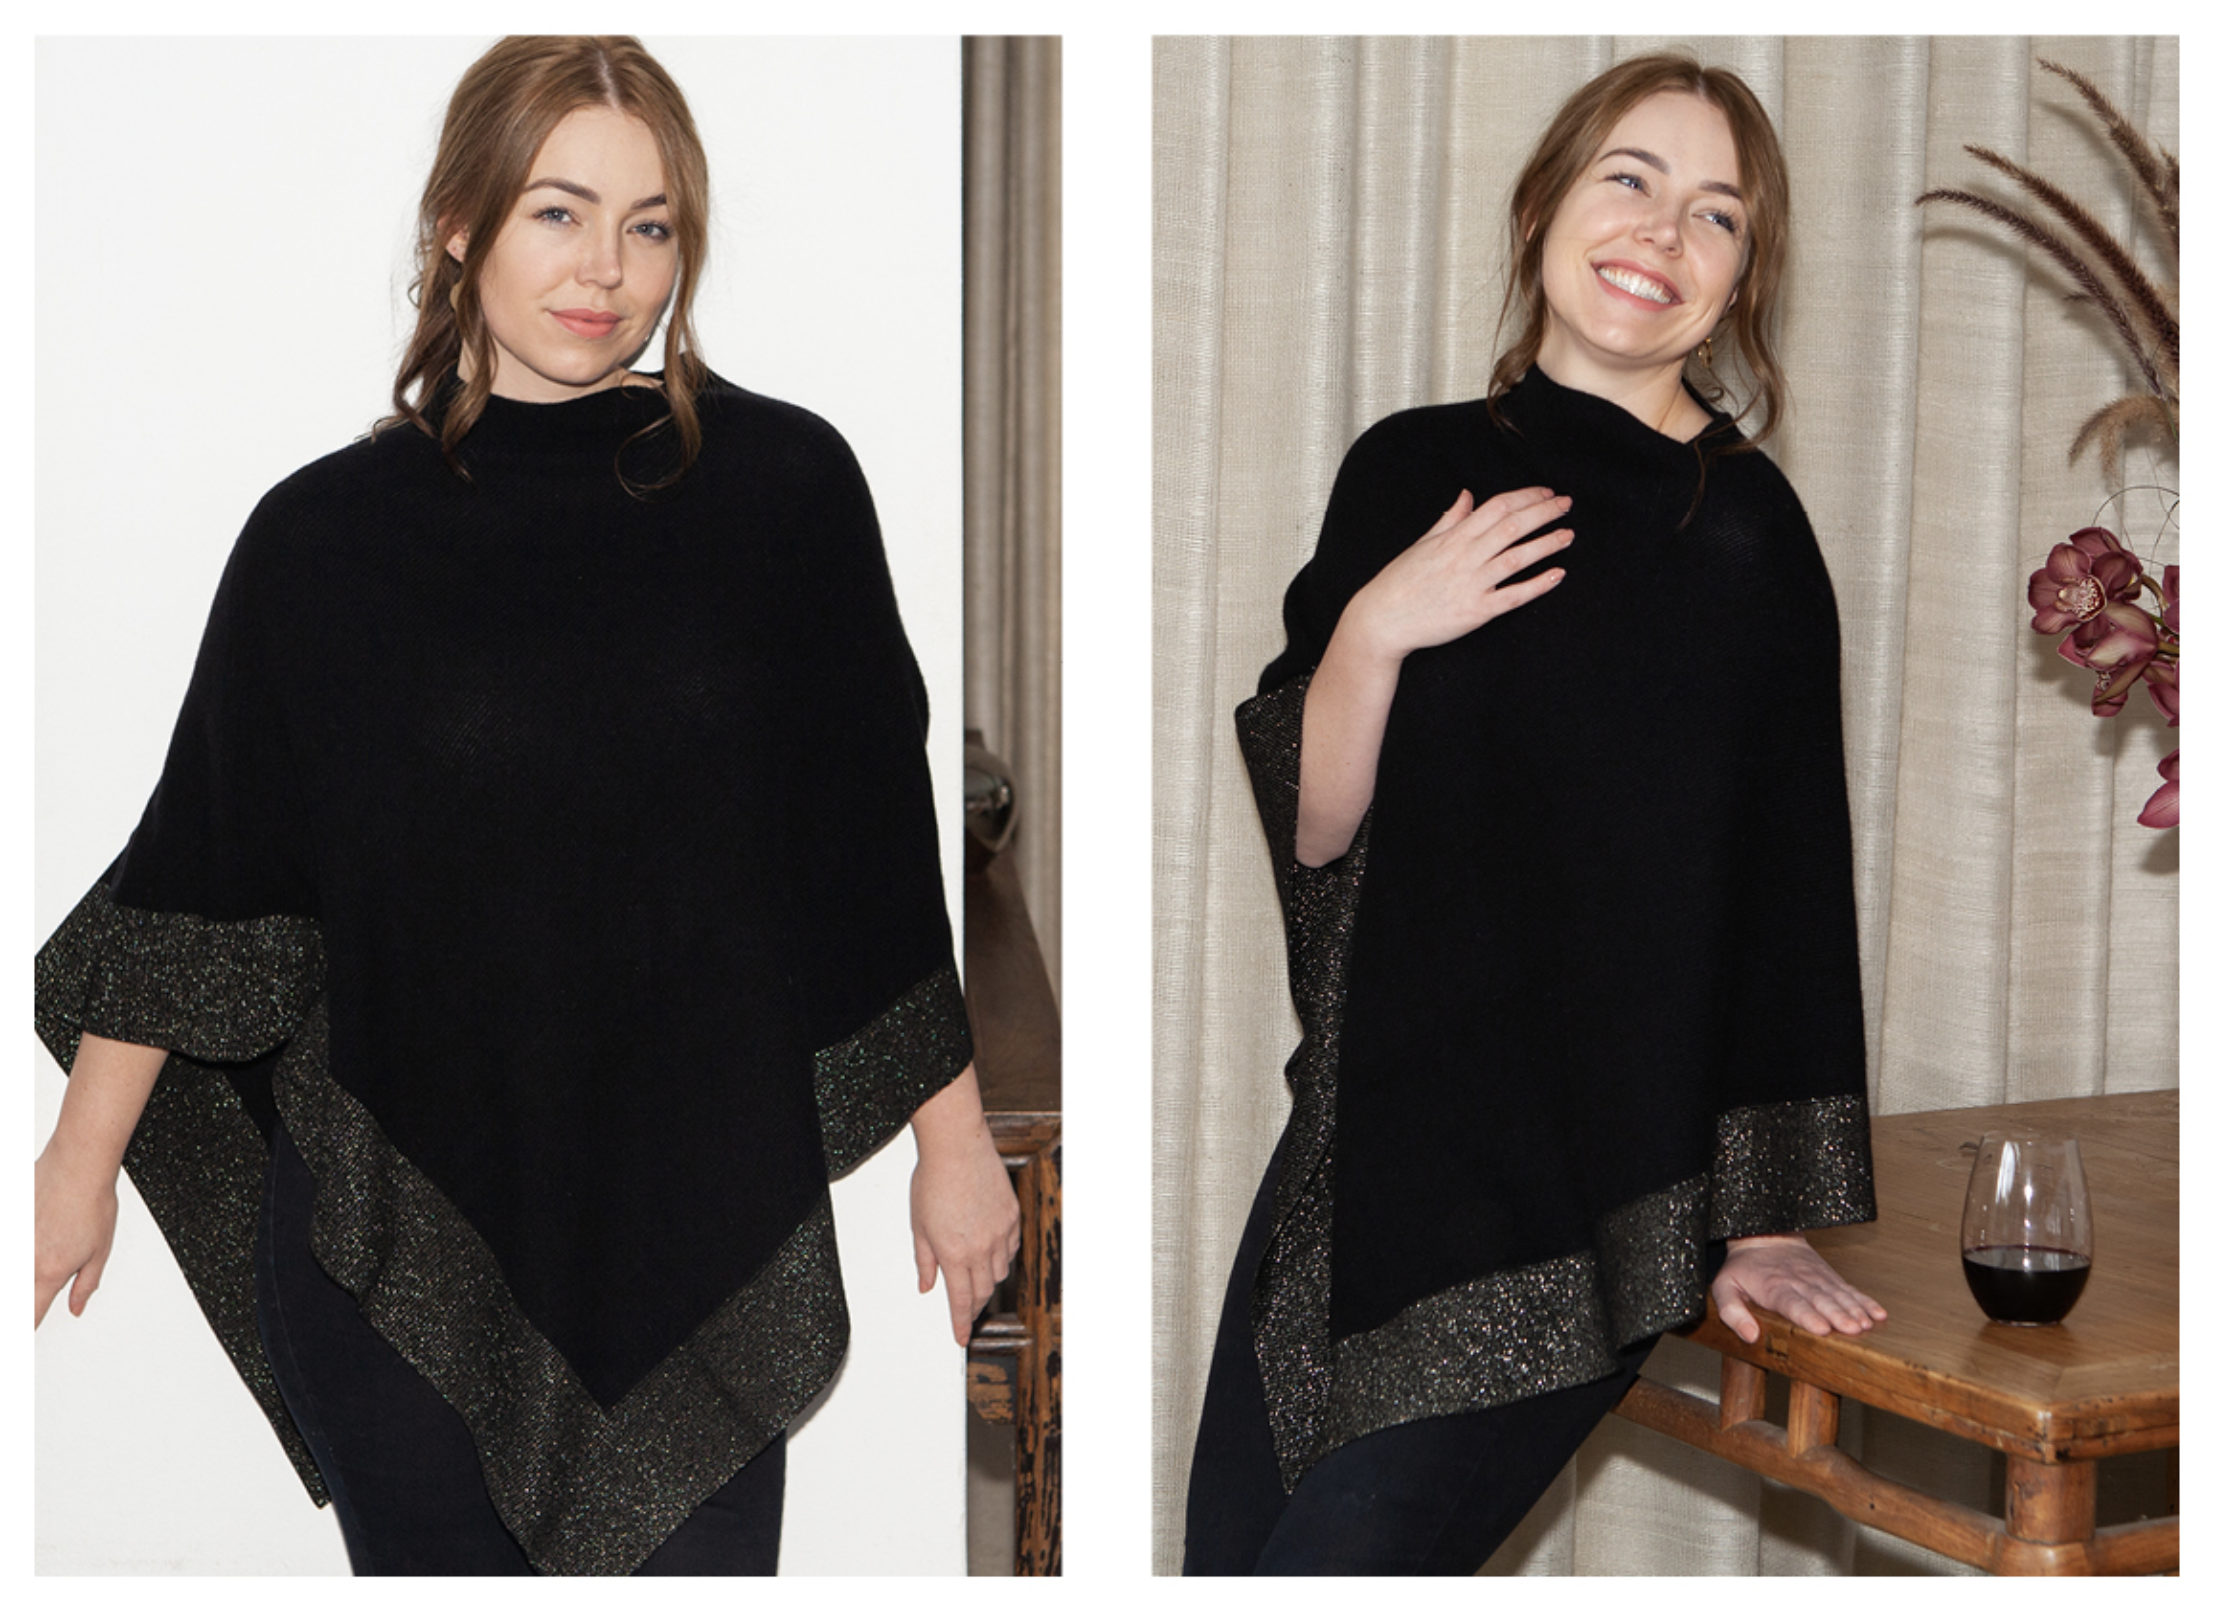 New: The Black Russian & The Cocktail Top - Simple yet sophisticated 